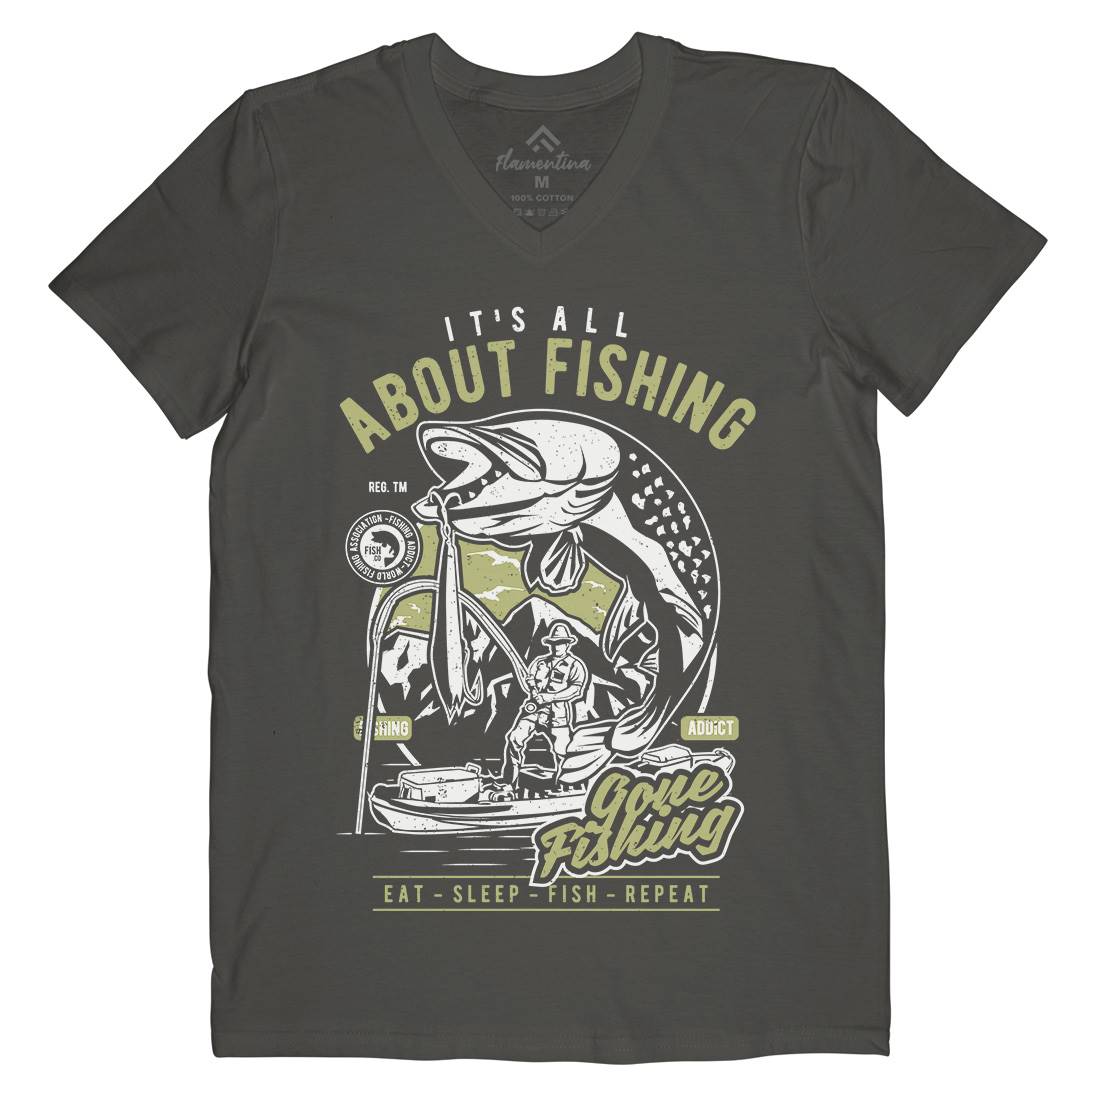 All About Mens V-Neck T-Shirt Fishing A604